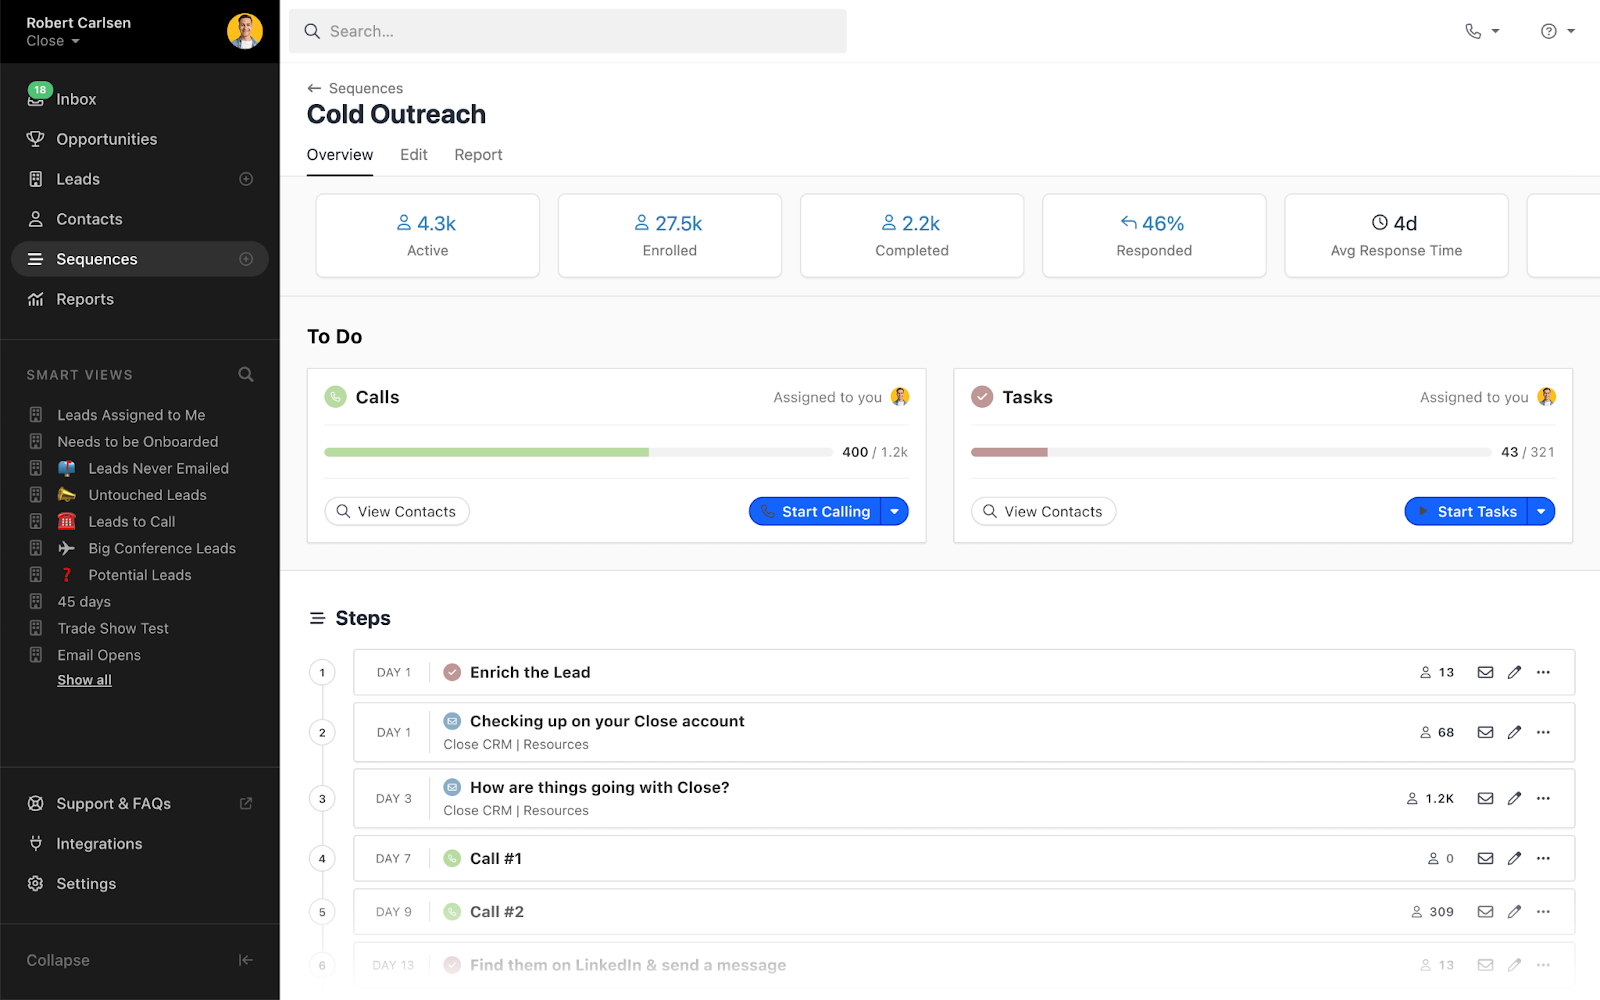 An dashboard showing tasks and steps for the "Could Outreach" campaign